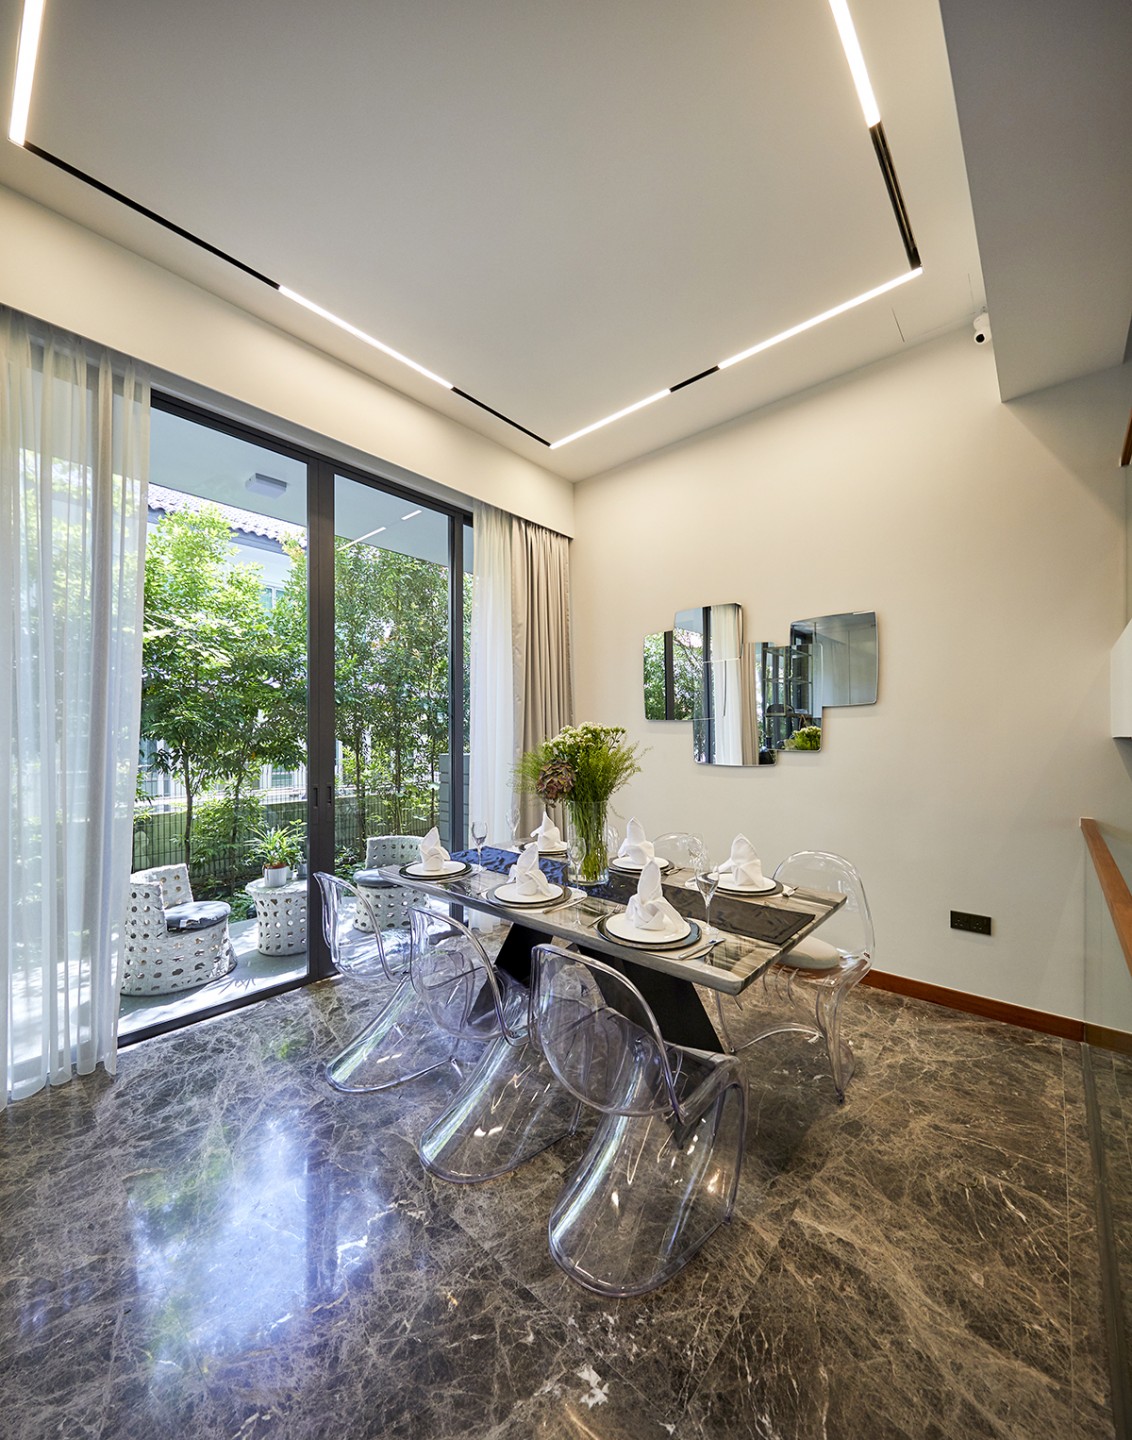 squarerooms i-chapter home design terraced house interior singapore luxury design dining room glass chairs see-through clear modern futuristic furniture